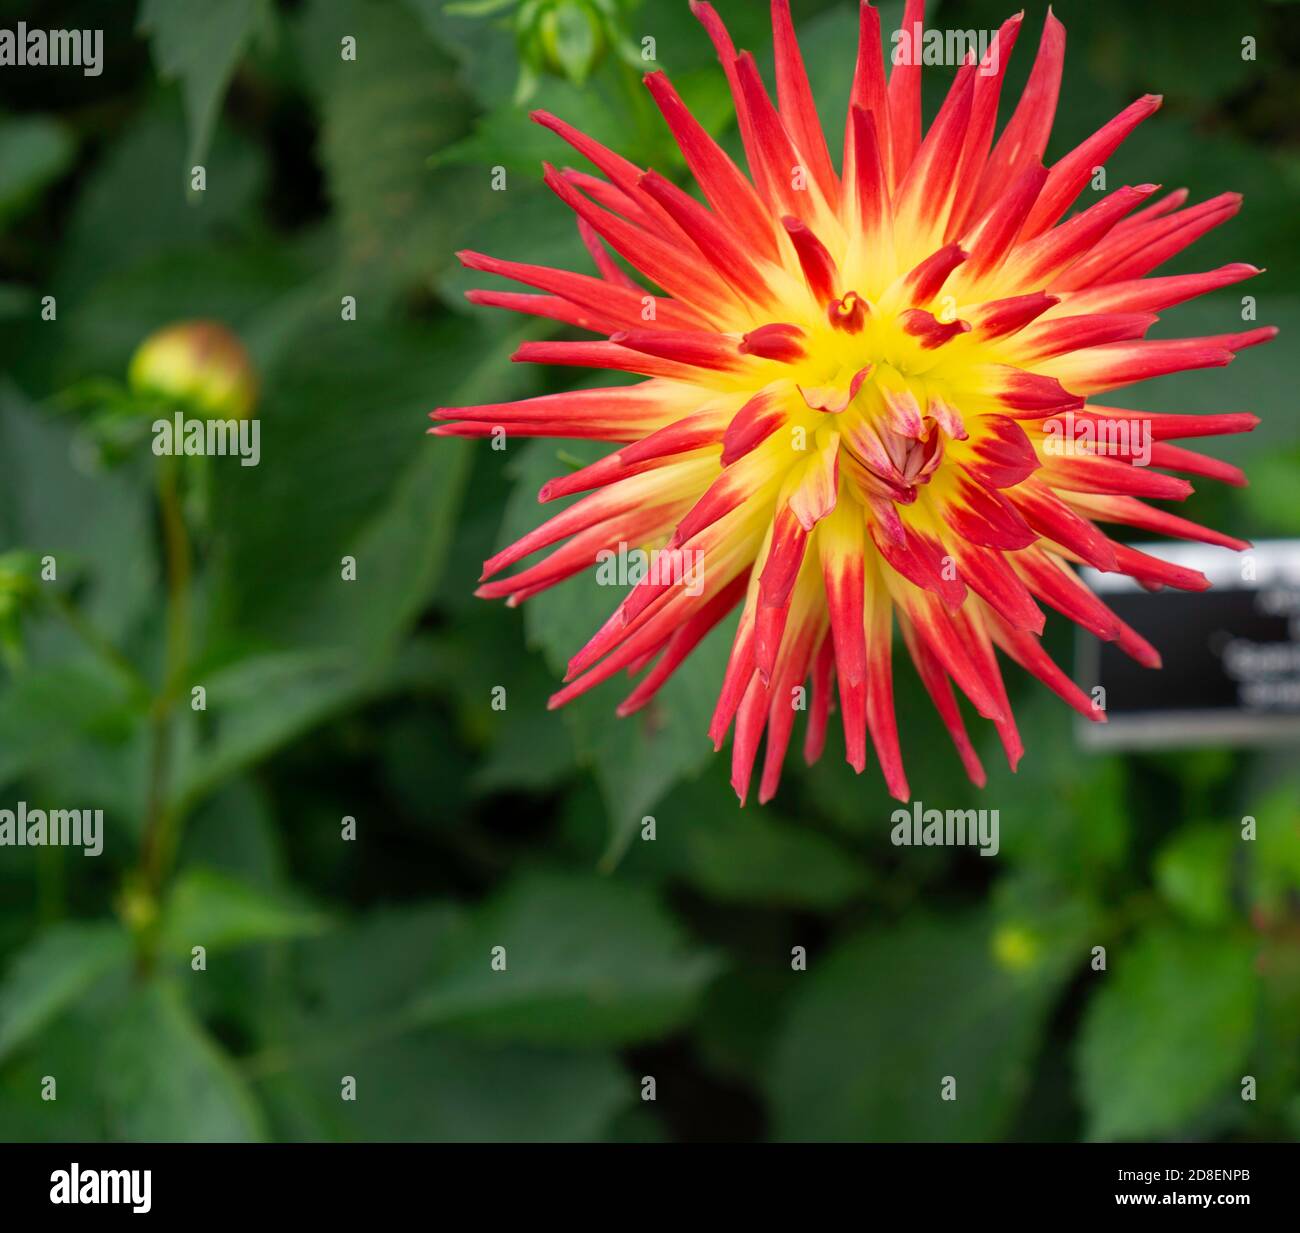 Dahlia Spanish Dancer Small Cactus, is a small cactus like dahlia with a yellow base and striking red at the tips. Stock Photo